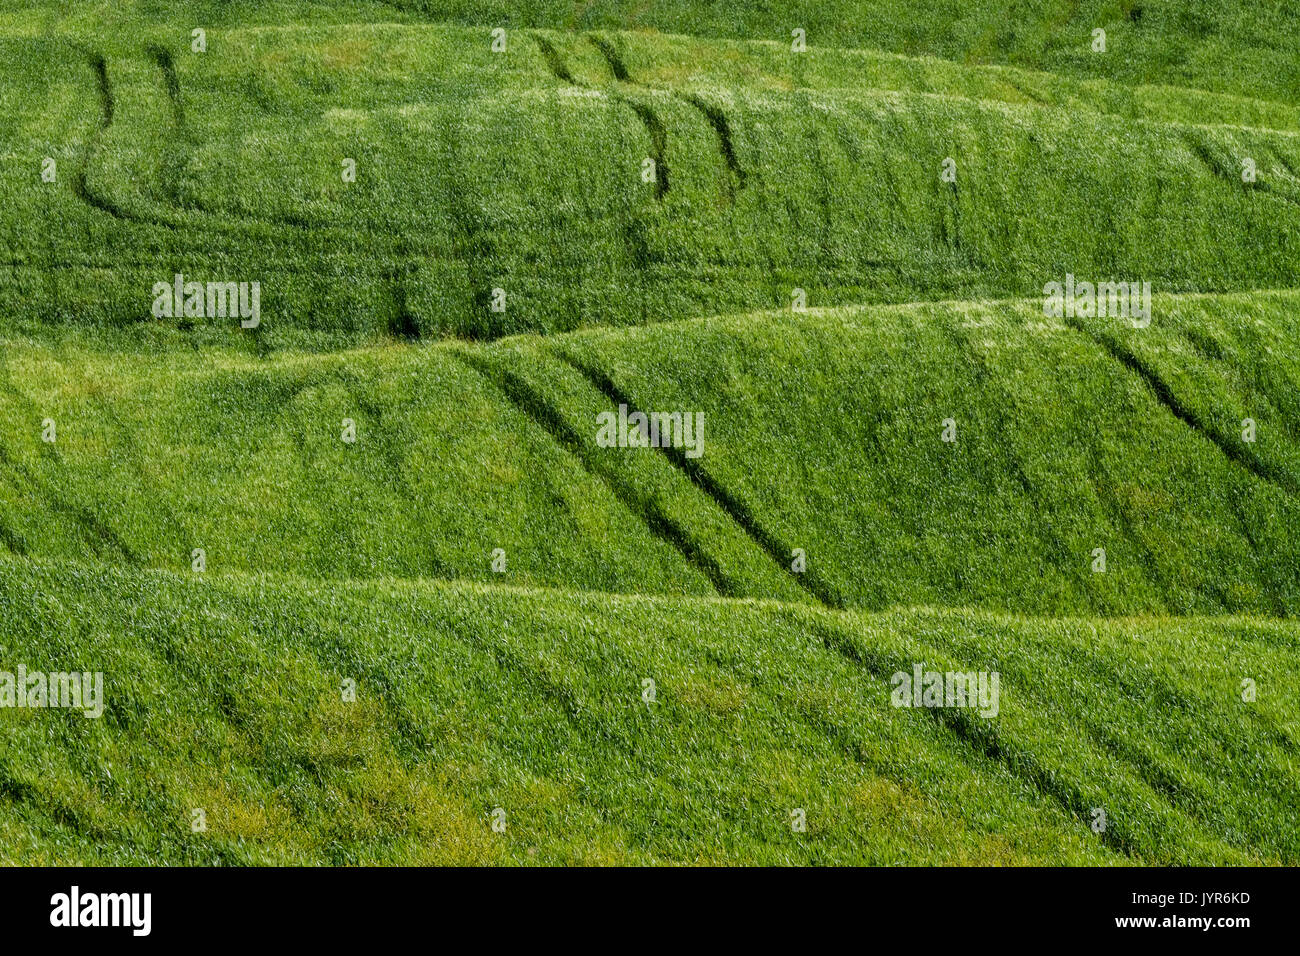 Trails of a tractor on the green hills of wheat in the countryside near Asciano, Val d'Orcia, Tuscany, Italy. Stock Photo